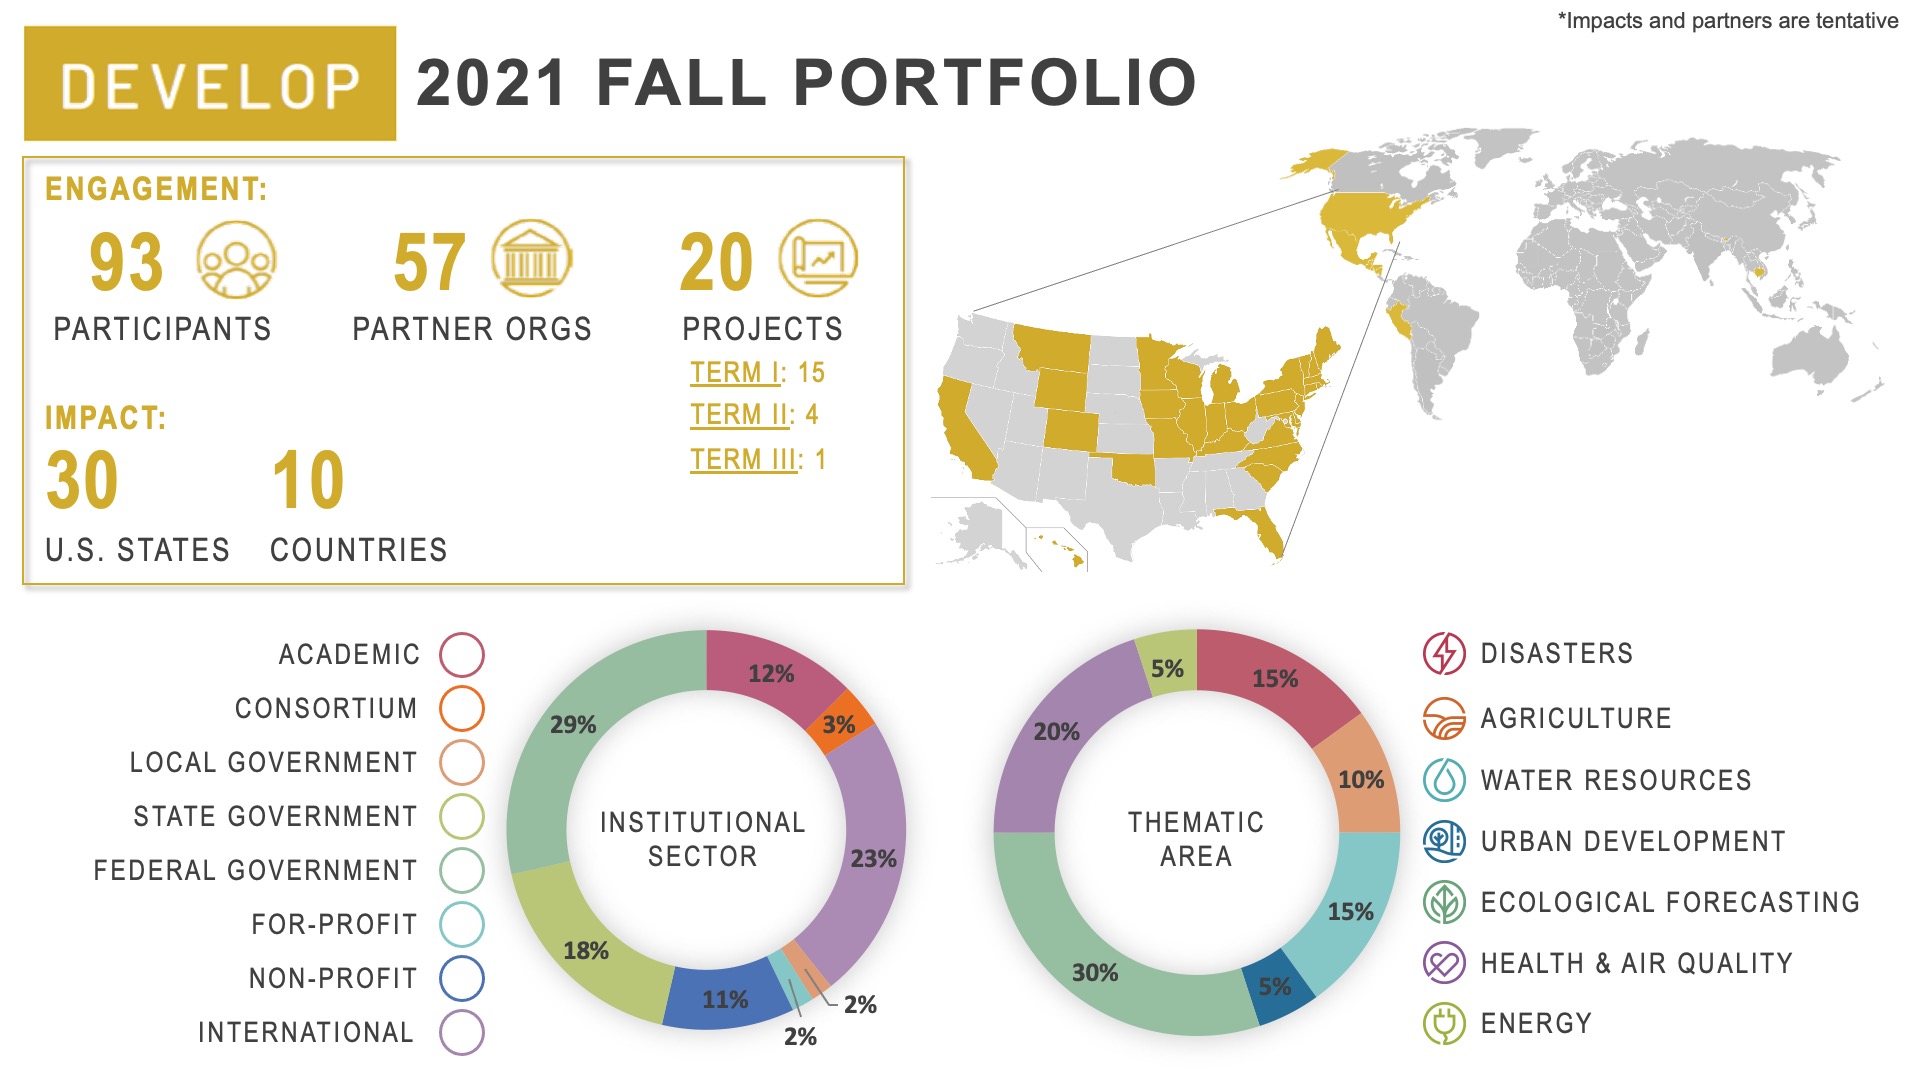 2021 Fall Portfolio Engagement:• 93 participants• 57 partner organizations• 20 projects (15 first term, 4 second term, 1 third term)Impact:• 30 U.S. States• 10 CountriesInstitutional sector:• 12% Academic• 3% Consortium• 2% Local government• 18% State government• 29% Federal government• 2% For-profit• 11% Non-profit• 23% InternationalThematic area:• 15% Disasters• 10% Agriculture• 15% Water resources• 5% Urban development• 30% Ecological forecasting• 20% Health & Air quality• 5% Energy